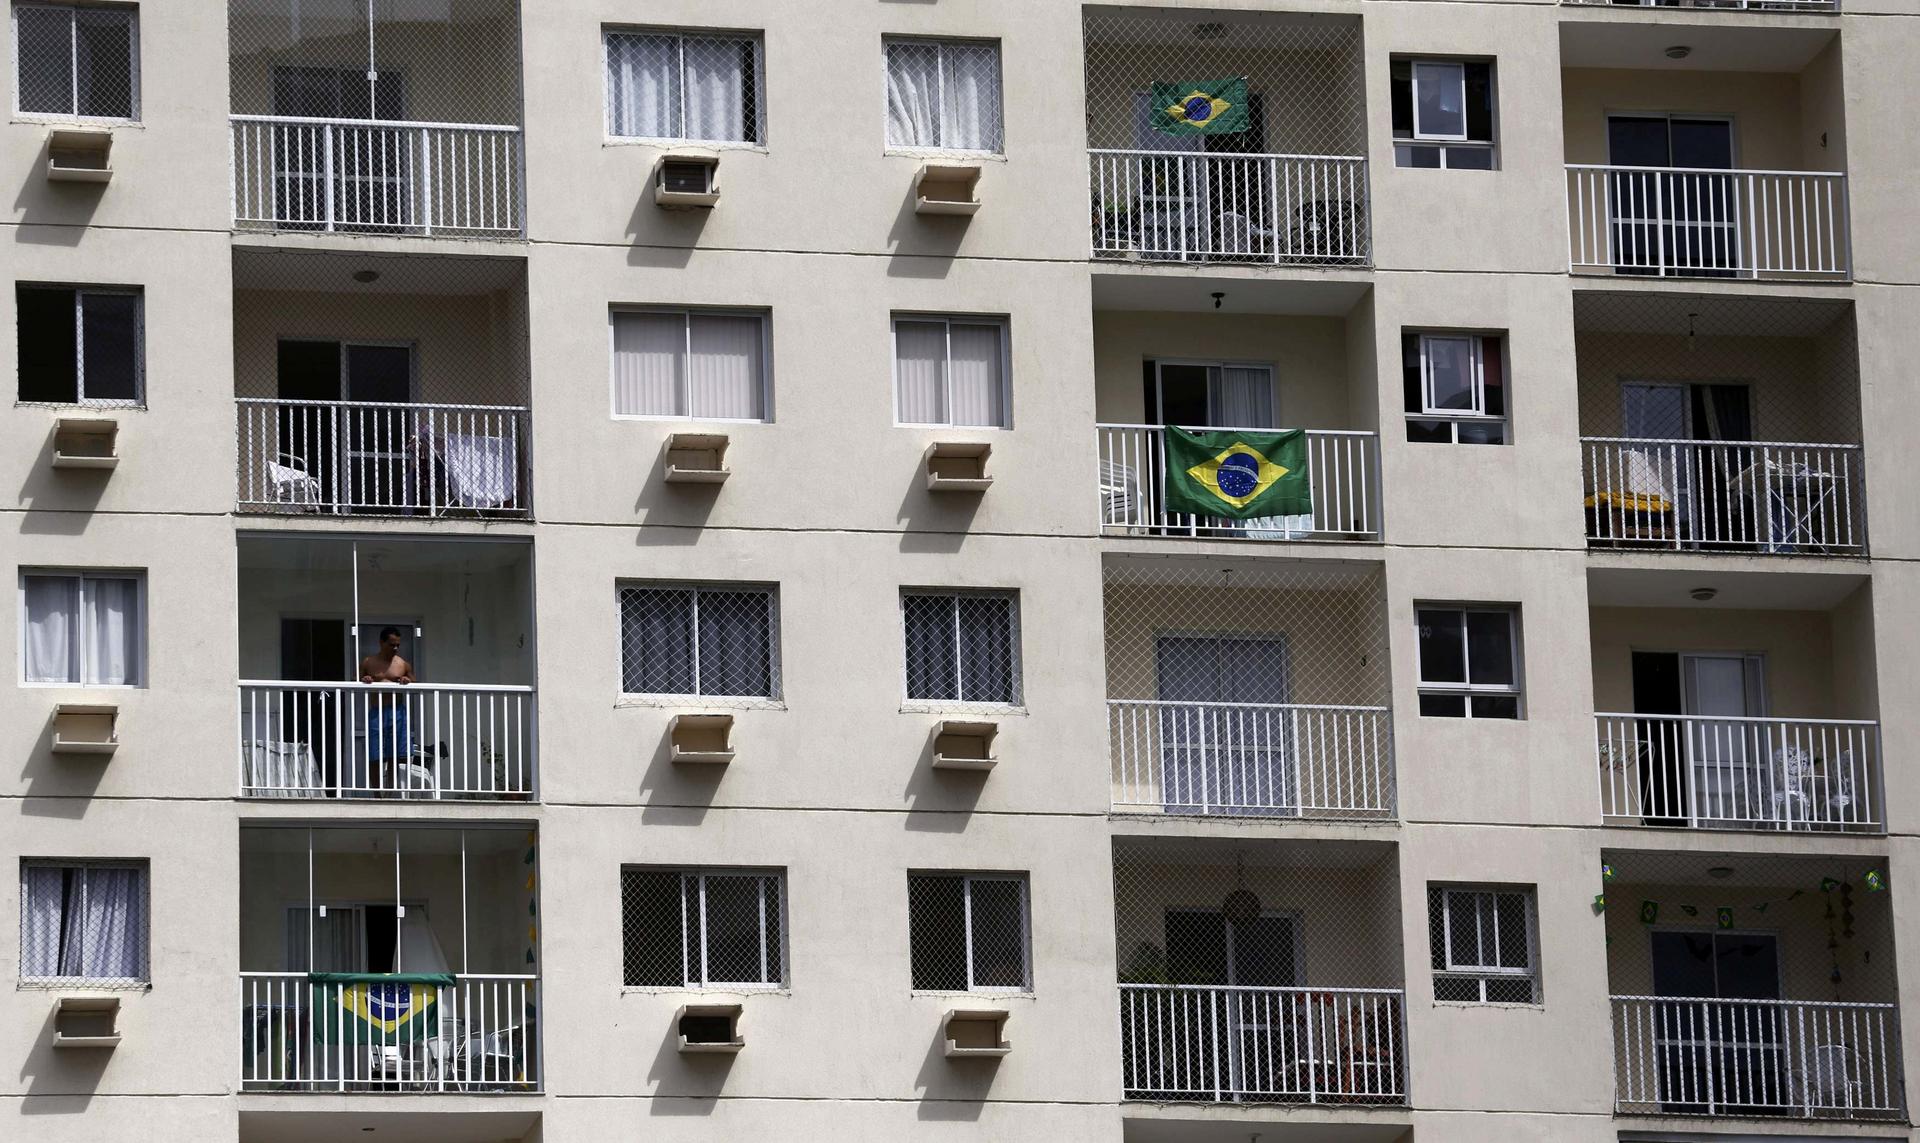 Brazil's successful bids for the 2014 Fifa World Cup and the 2016 Rio Olympic Games may have led to surging property prices. Photo: Reuters